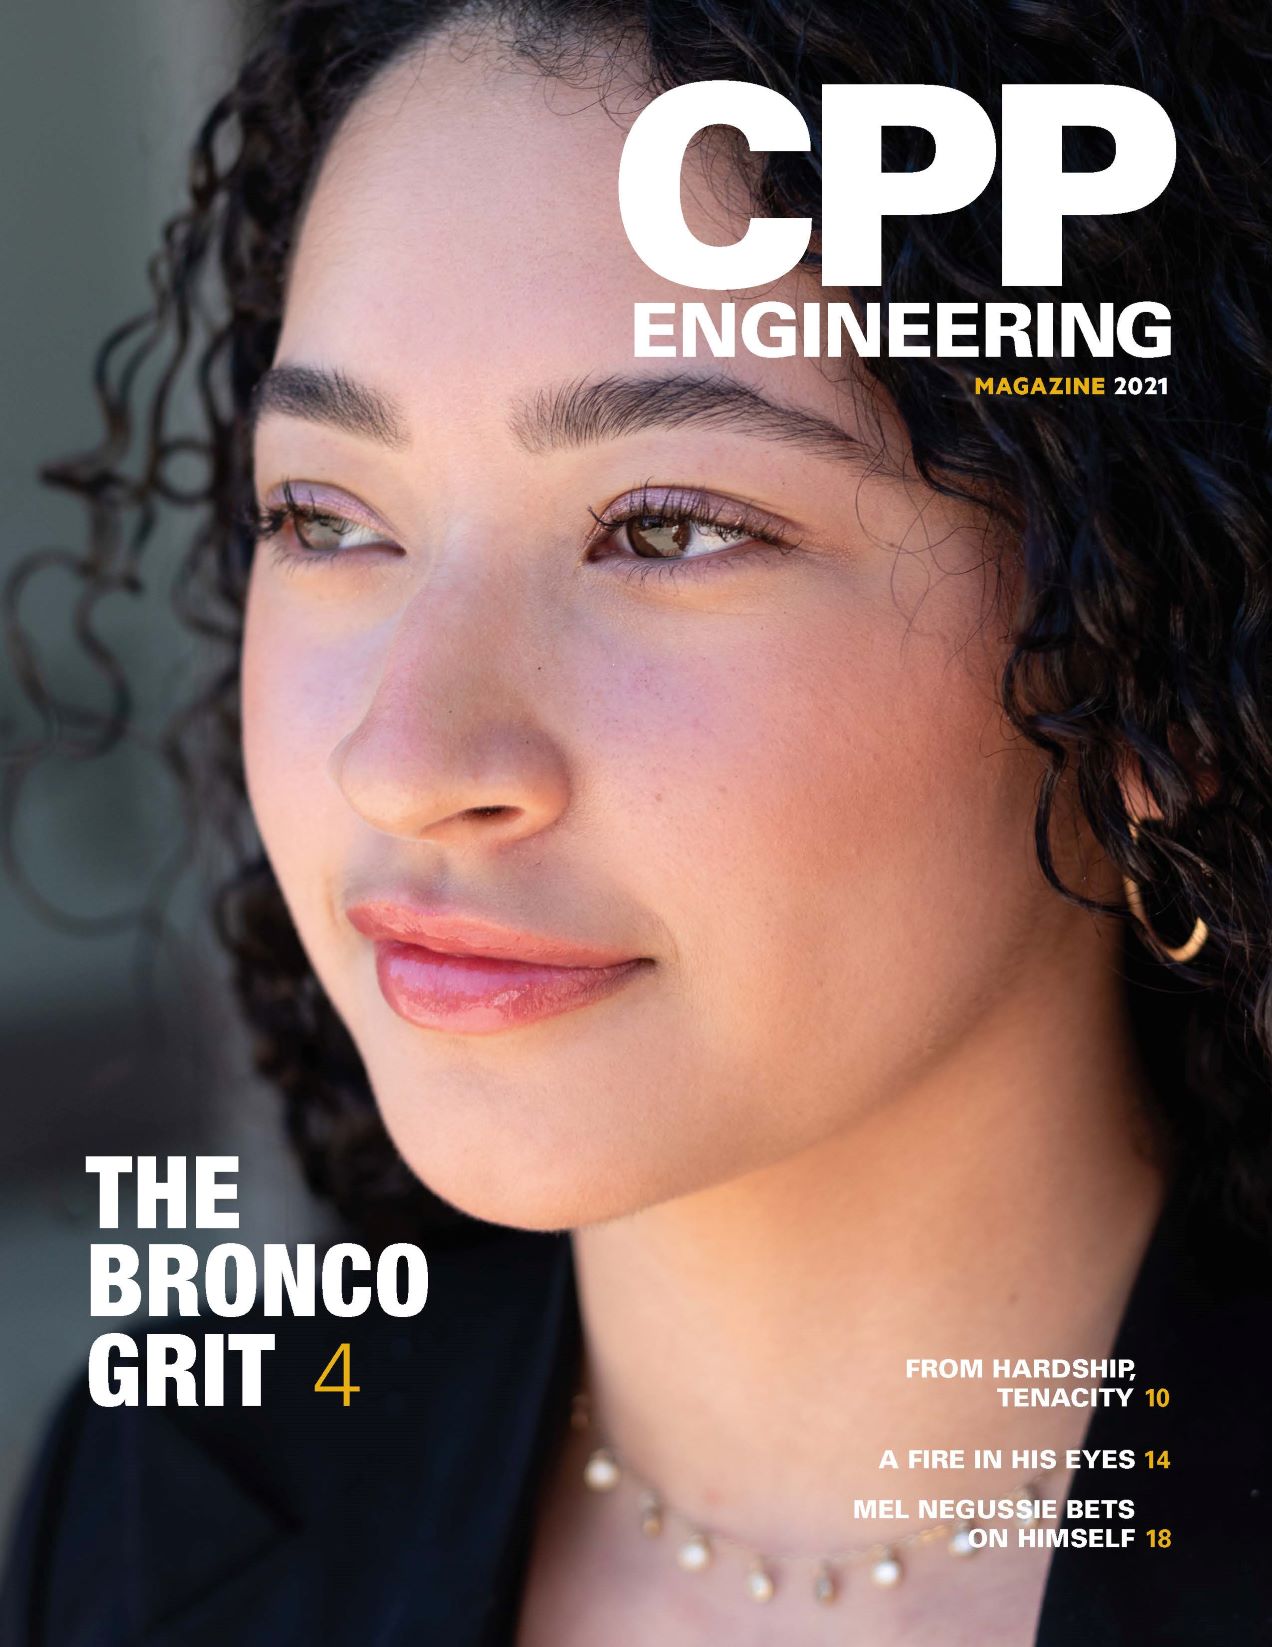 A magazine cover photo with a woman with a slight smile looking forward. The title of the magazine reads CPP Engineering Magazine 2021 with story teaser text that reads The Bronco Grit page 4, From Hardship Tenacity page 19, A Fire in His Eyes page 14 and Mel Negussie Bets on Himself page 18